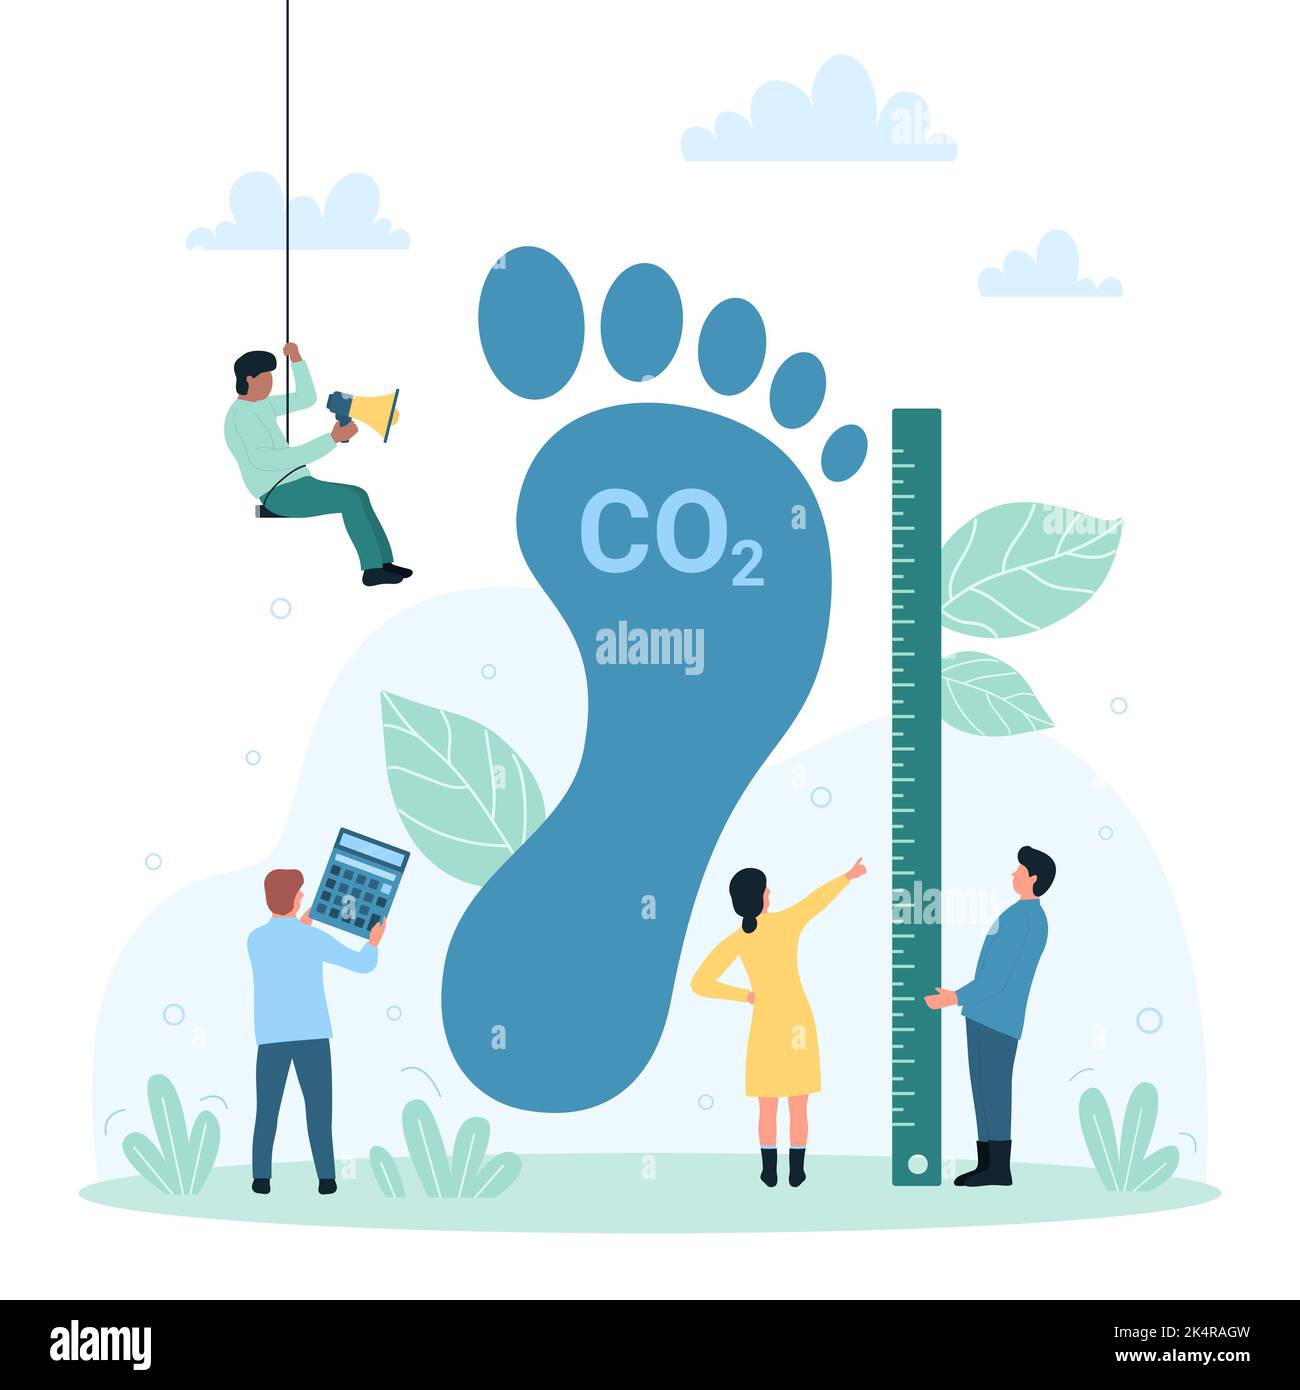 Carbon footprint pollution, environmental effect of greenhouse gas vector illustration. Cartoon tiny people measure big foot of CO2, calculate impact on ecology of planet using calculator and ruler Stock Vector